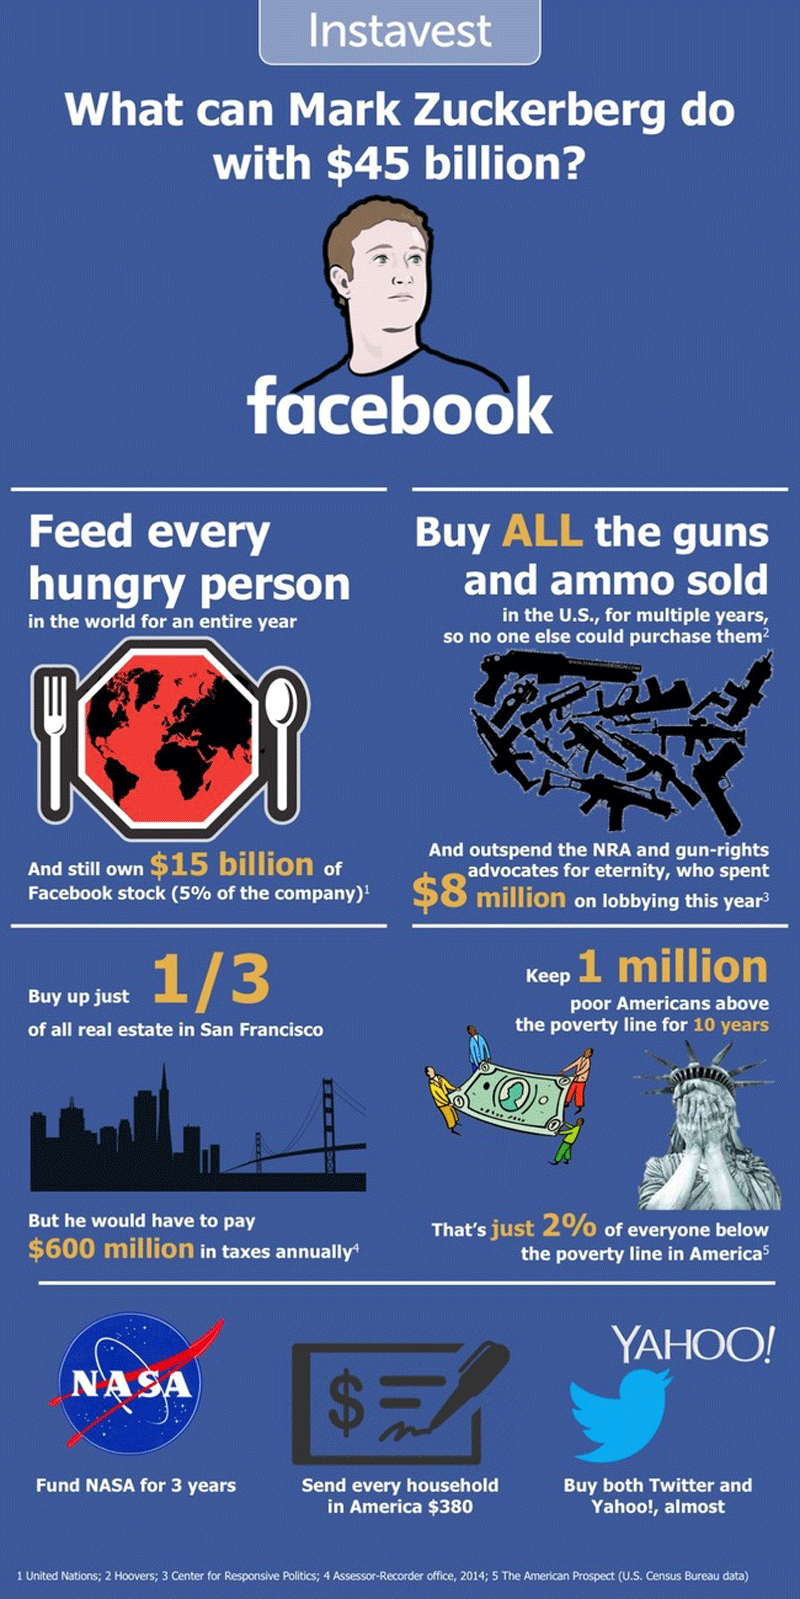 This infographic shows what Mark Zuckerberg could do with his Facebook shares if he wasn't giving them away